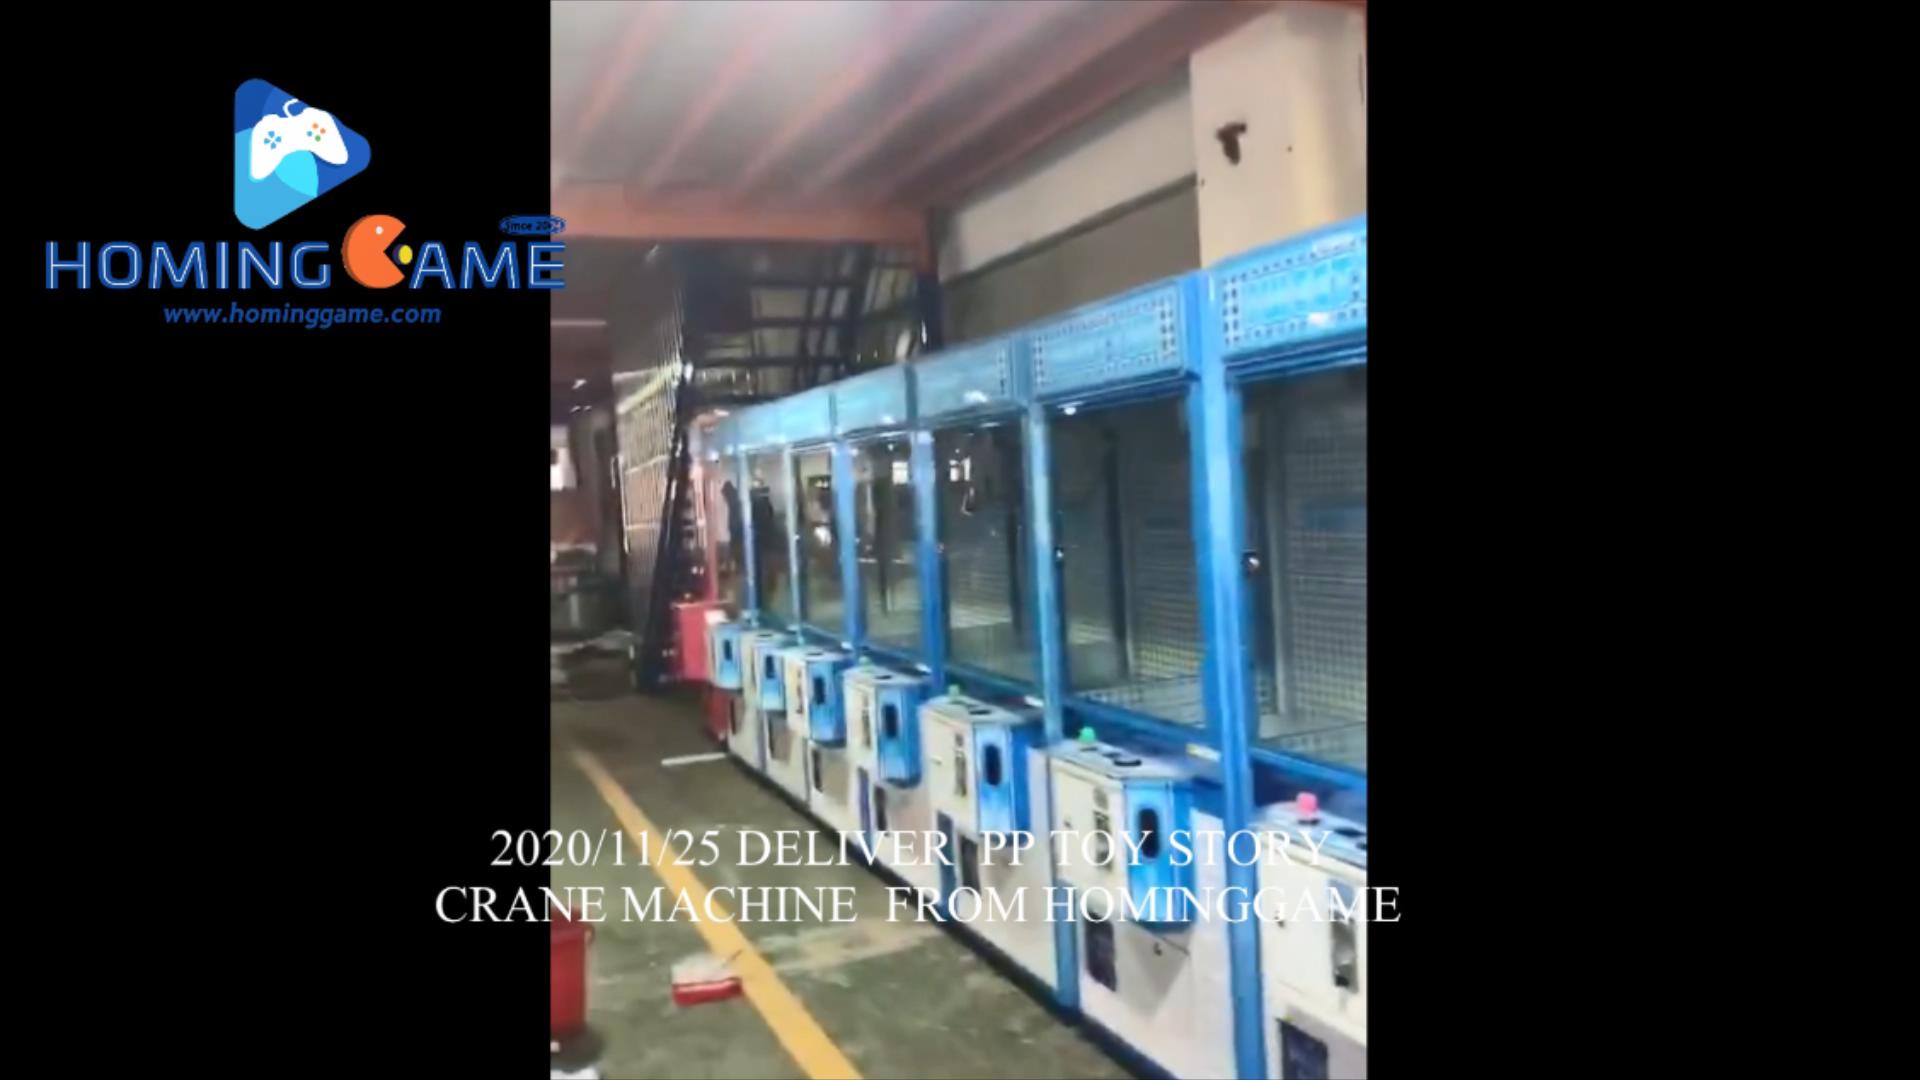 2020 11 25 Deliver Hot Sale Coin Operated PP Toy Story Crane Machine To USA from HomingGame（order call whatsapp:+8618688409495),toy story crane machine,toy story,crane machine,crane game machine,crane game,coin operated crane machine,coin operated crane game machine,catch prize game machine,catch plush crane machine,game machine,arcade game machine,coin operated game machine,amusement machine,amusement park game equipment,indoor game machine,prize vending machine,vending machine,indoor game,electrical game machine,arcade games,hominggame,www.gametube.hk,entertainment game,family entertainment game machine,amusement crane machine,electrical game,shopping mall prize game machine,prize vending,vending game machine